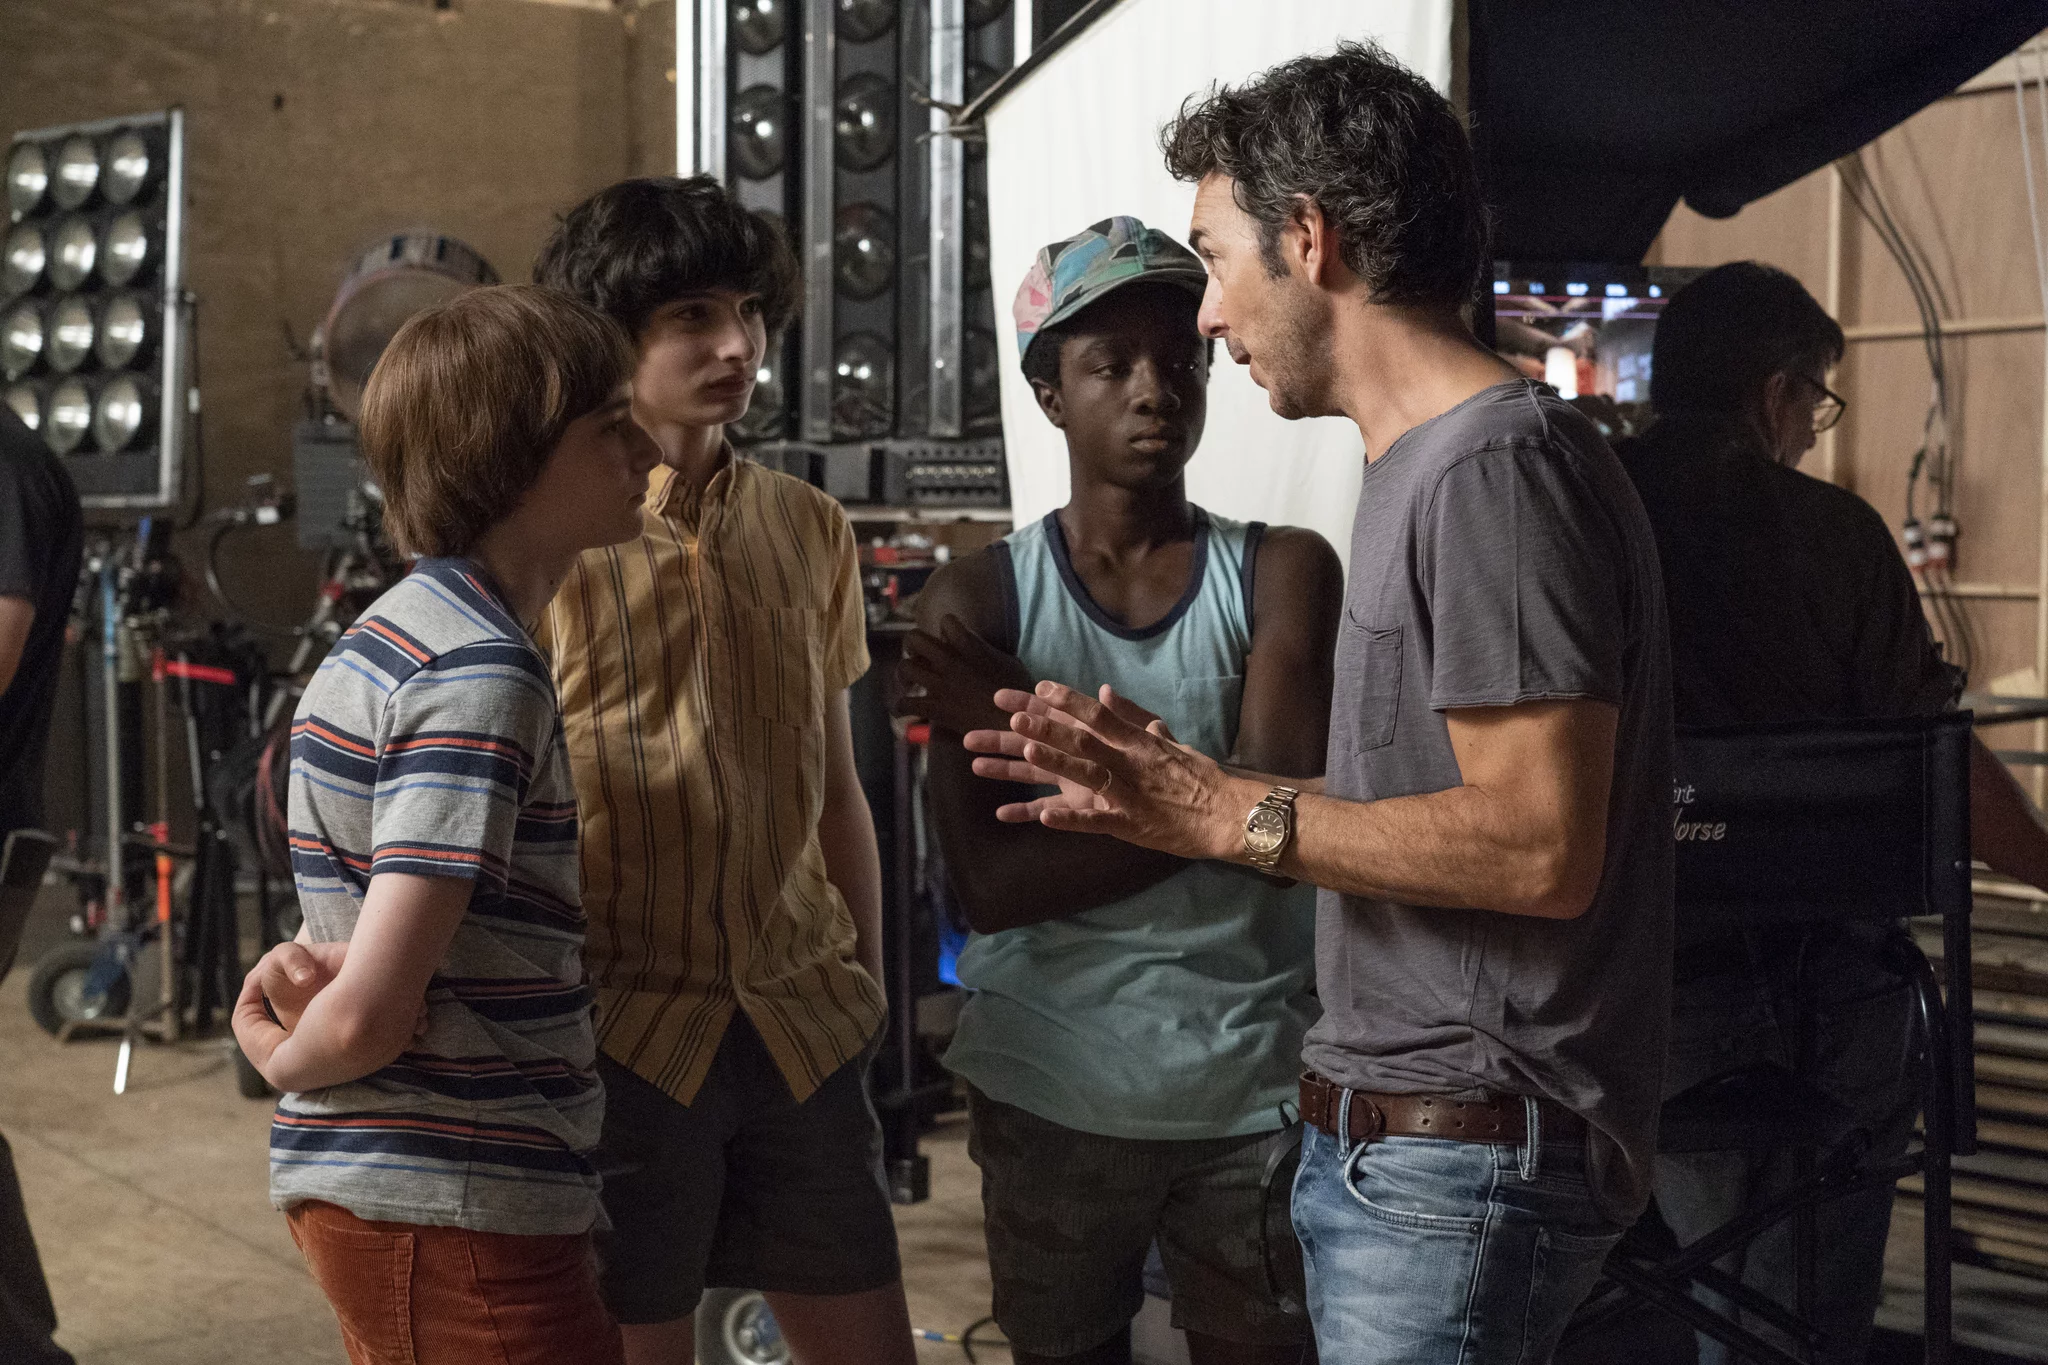 Deadpool 3 director Shawn Levy on the set of Stranger Things